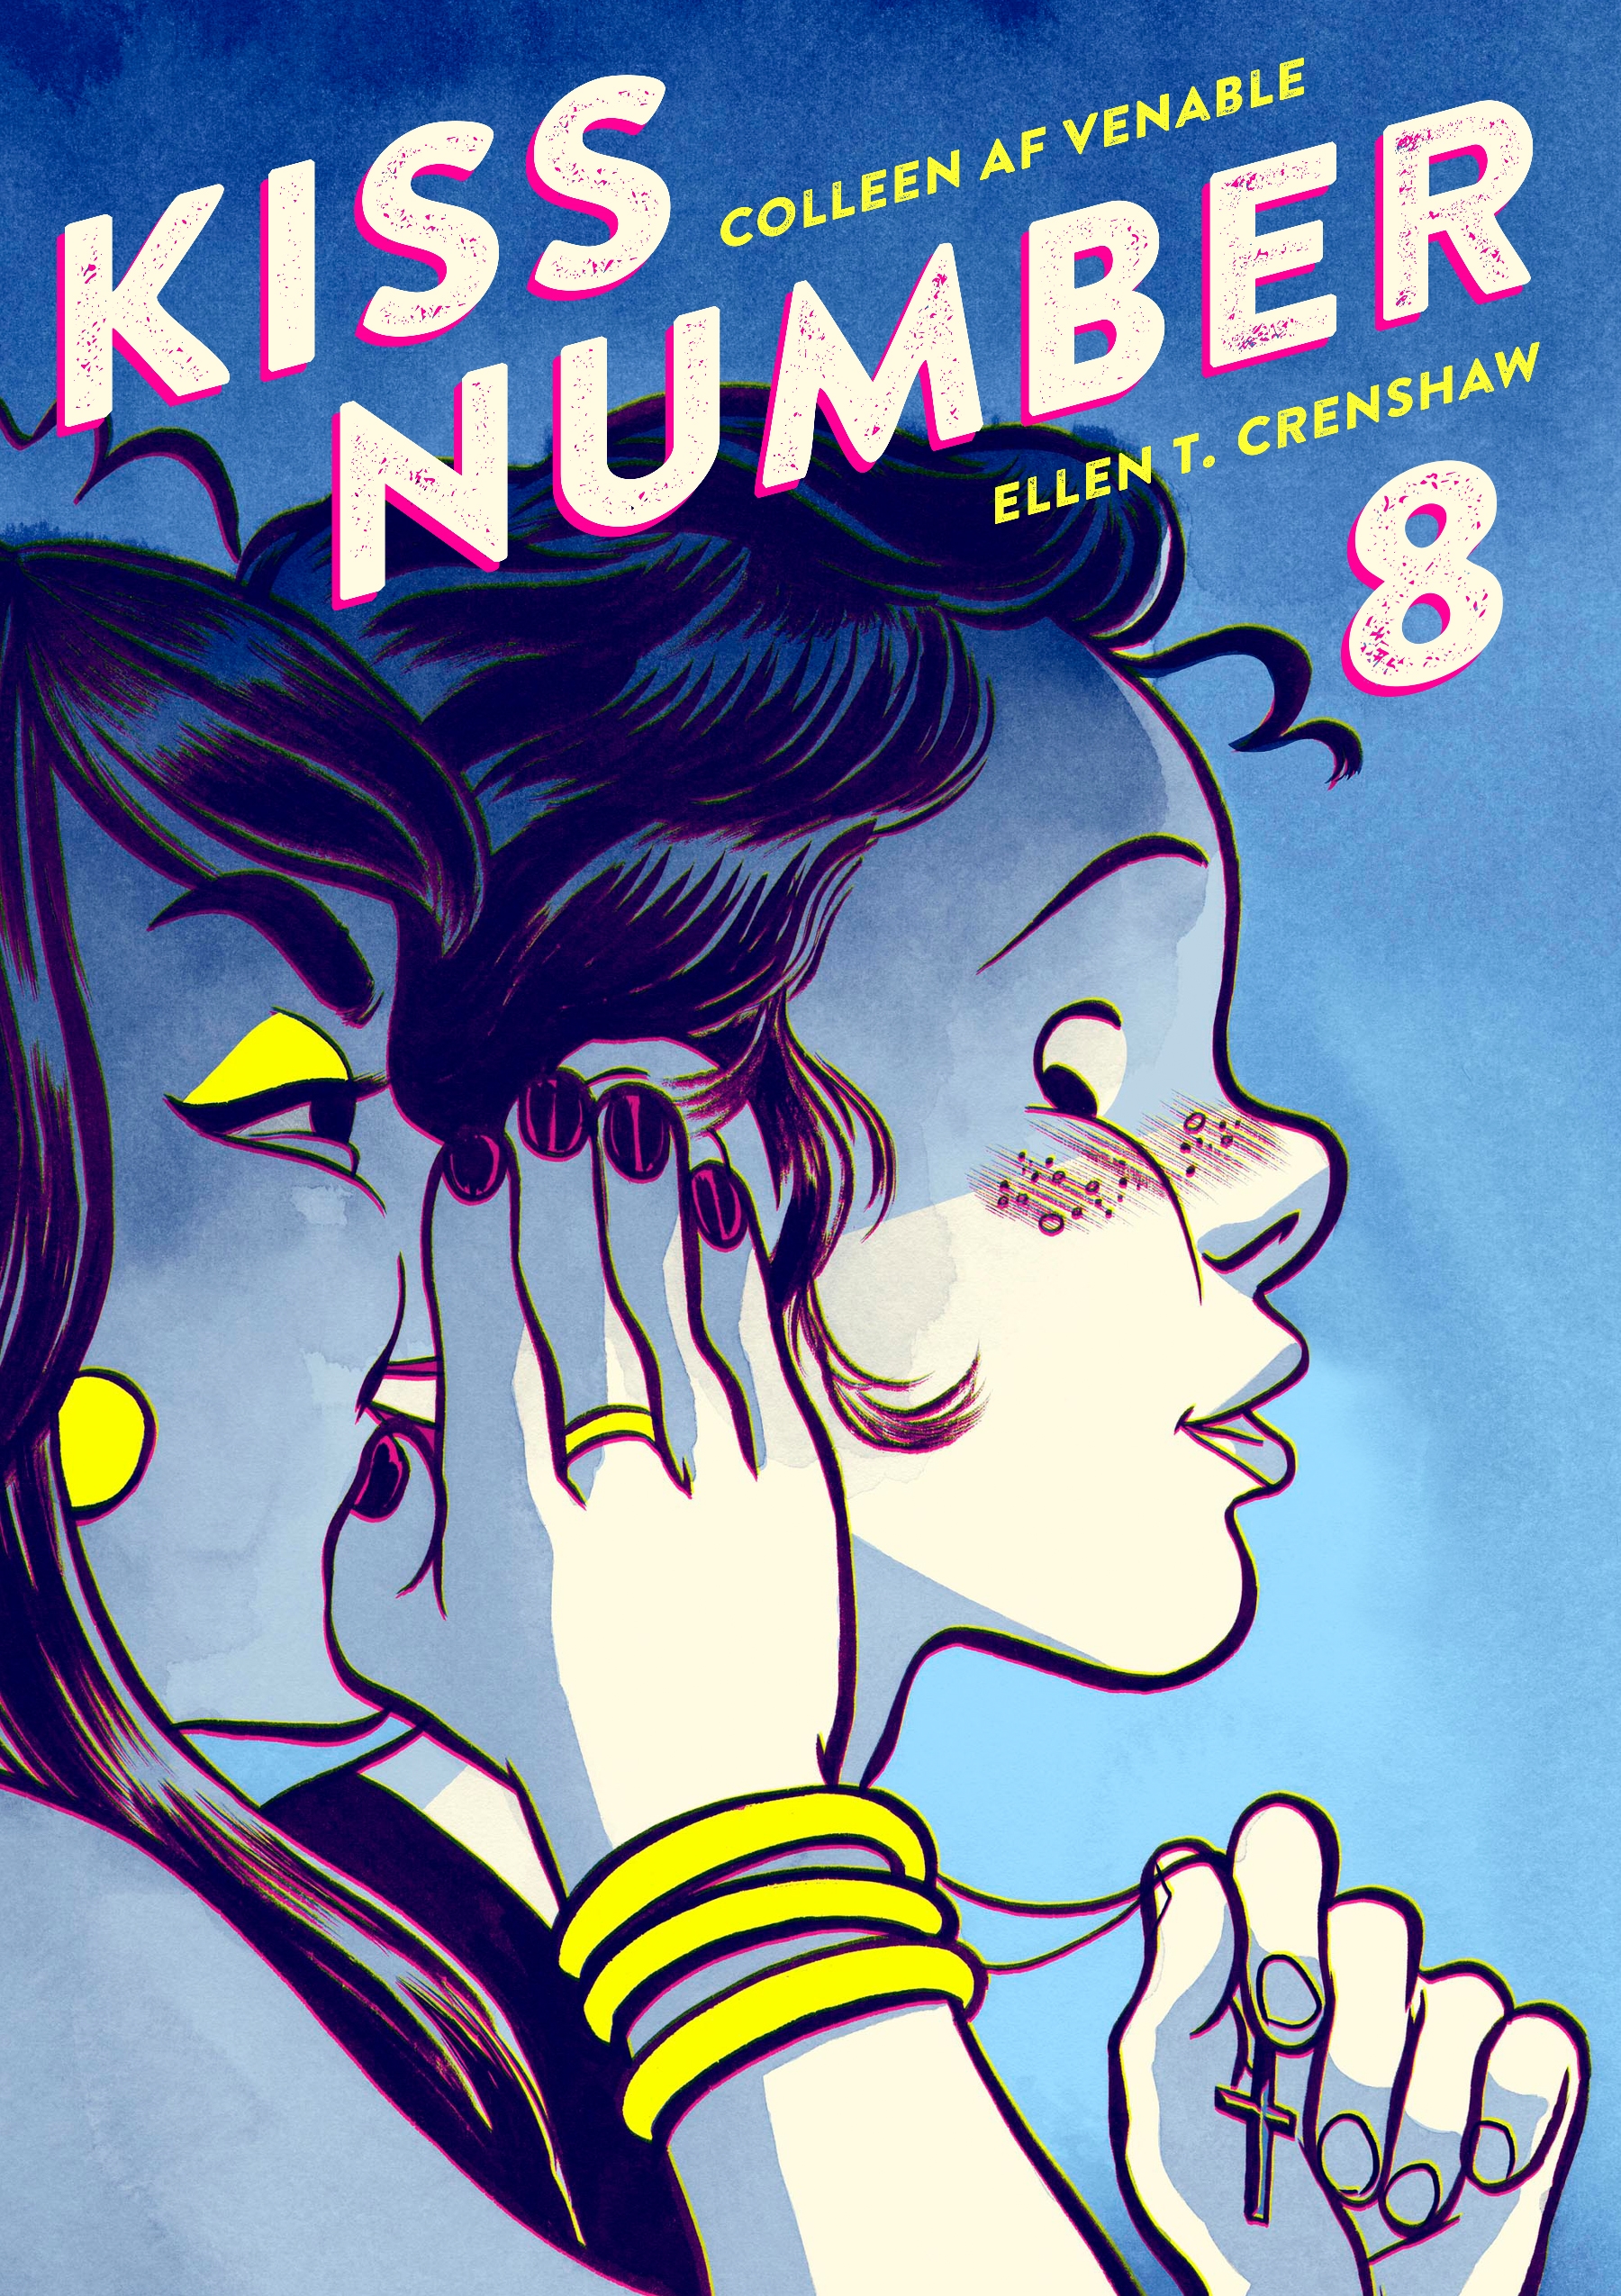 Book Kiss Number 8